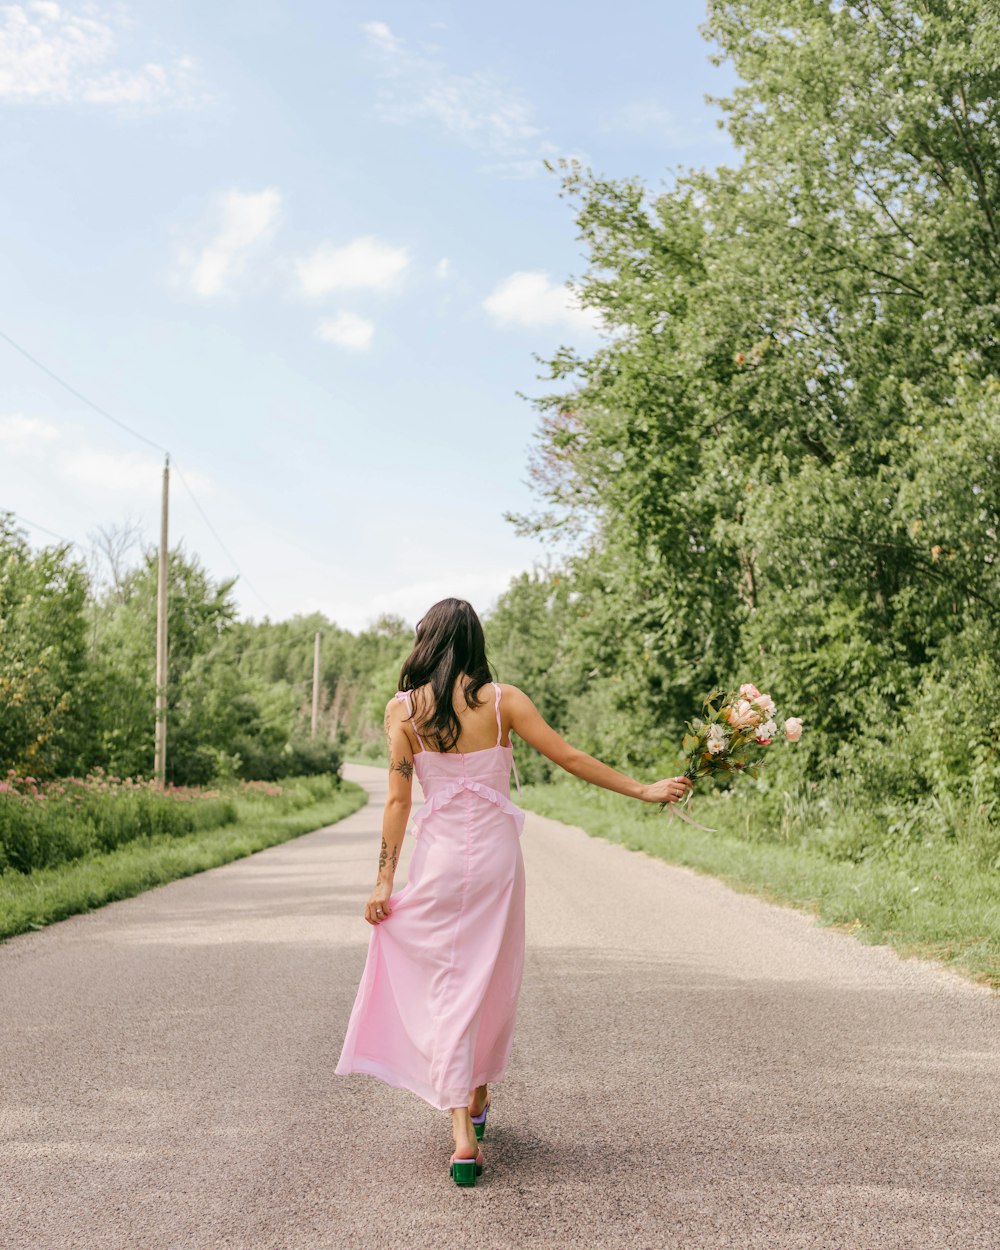 a person in a pink dress walking down a road